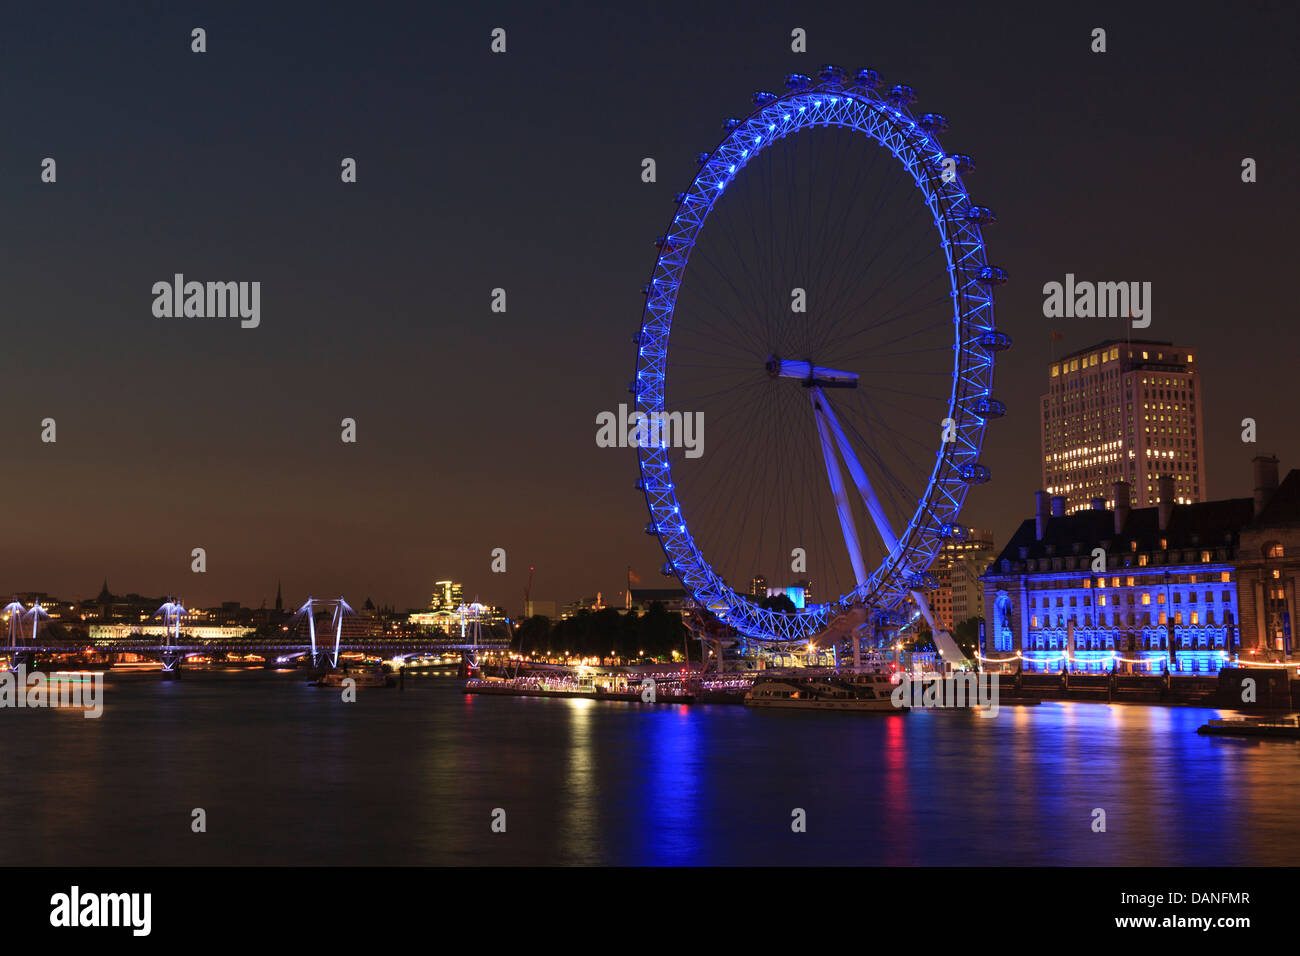 The London Eye is a giant Ferris wheel on the South Bank of the River Thames in London, England. Stock Photo